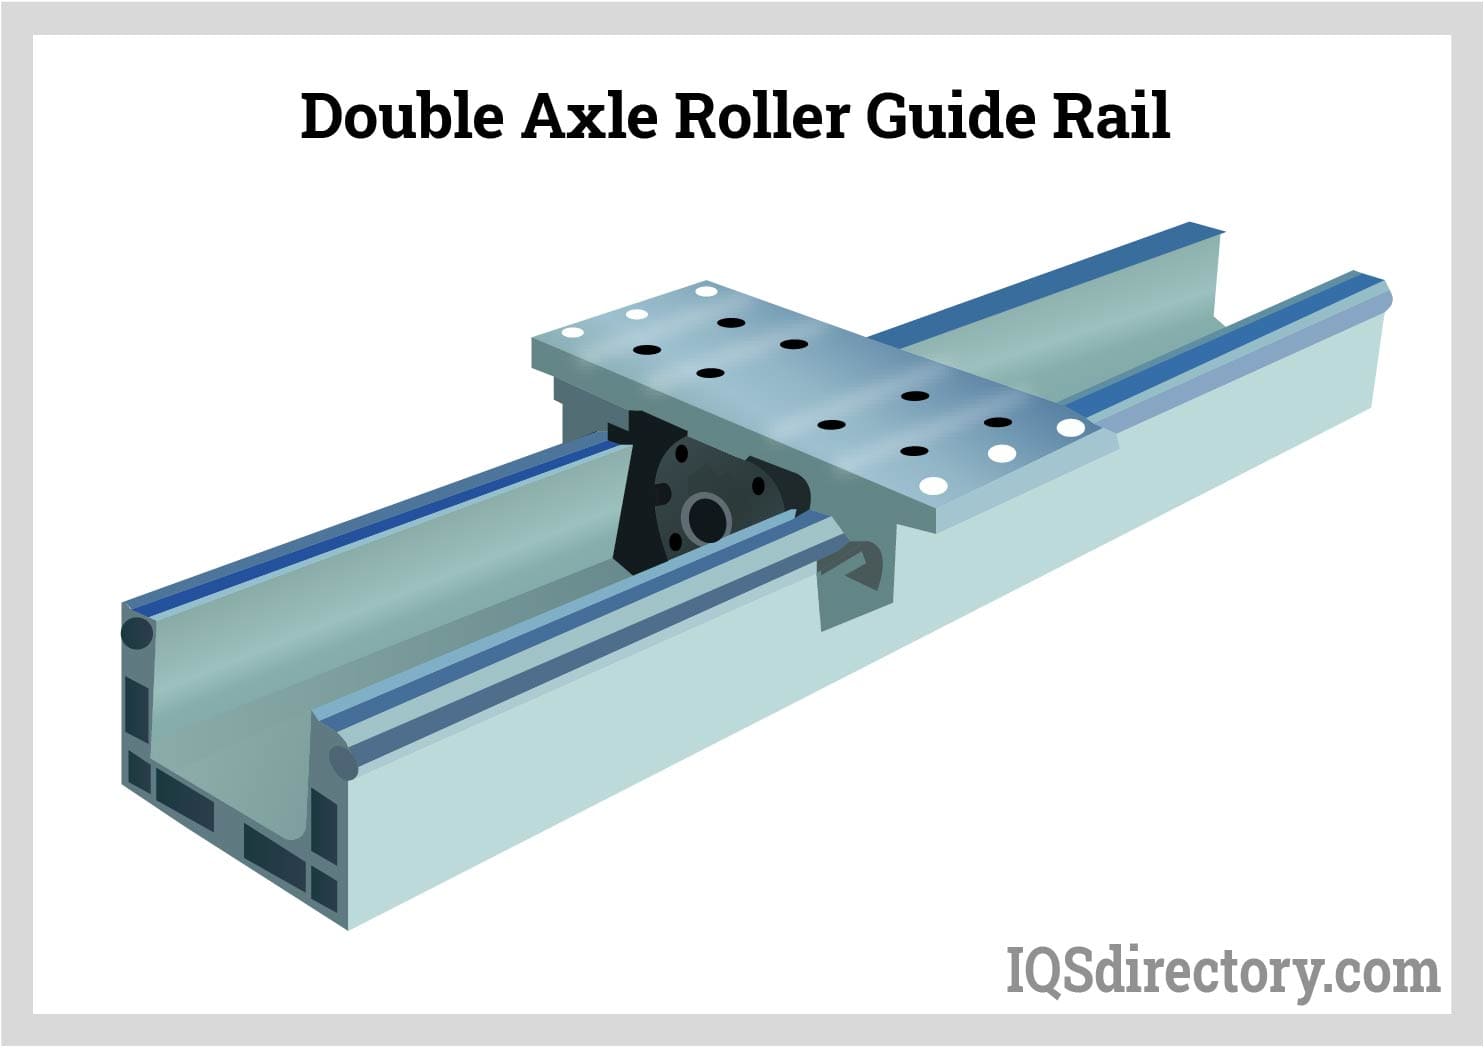 Double Axle Roller Guide Rail